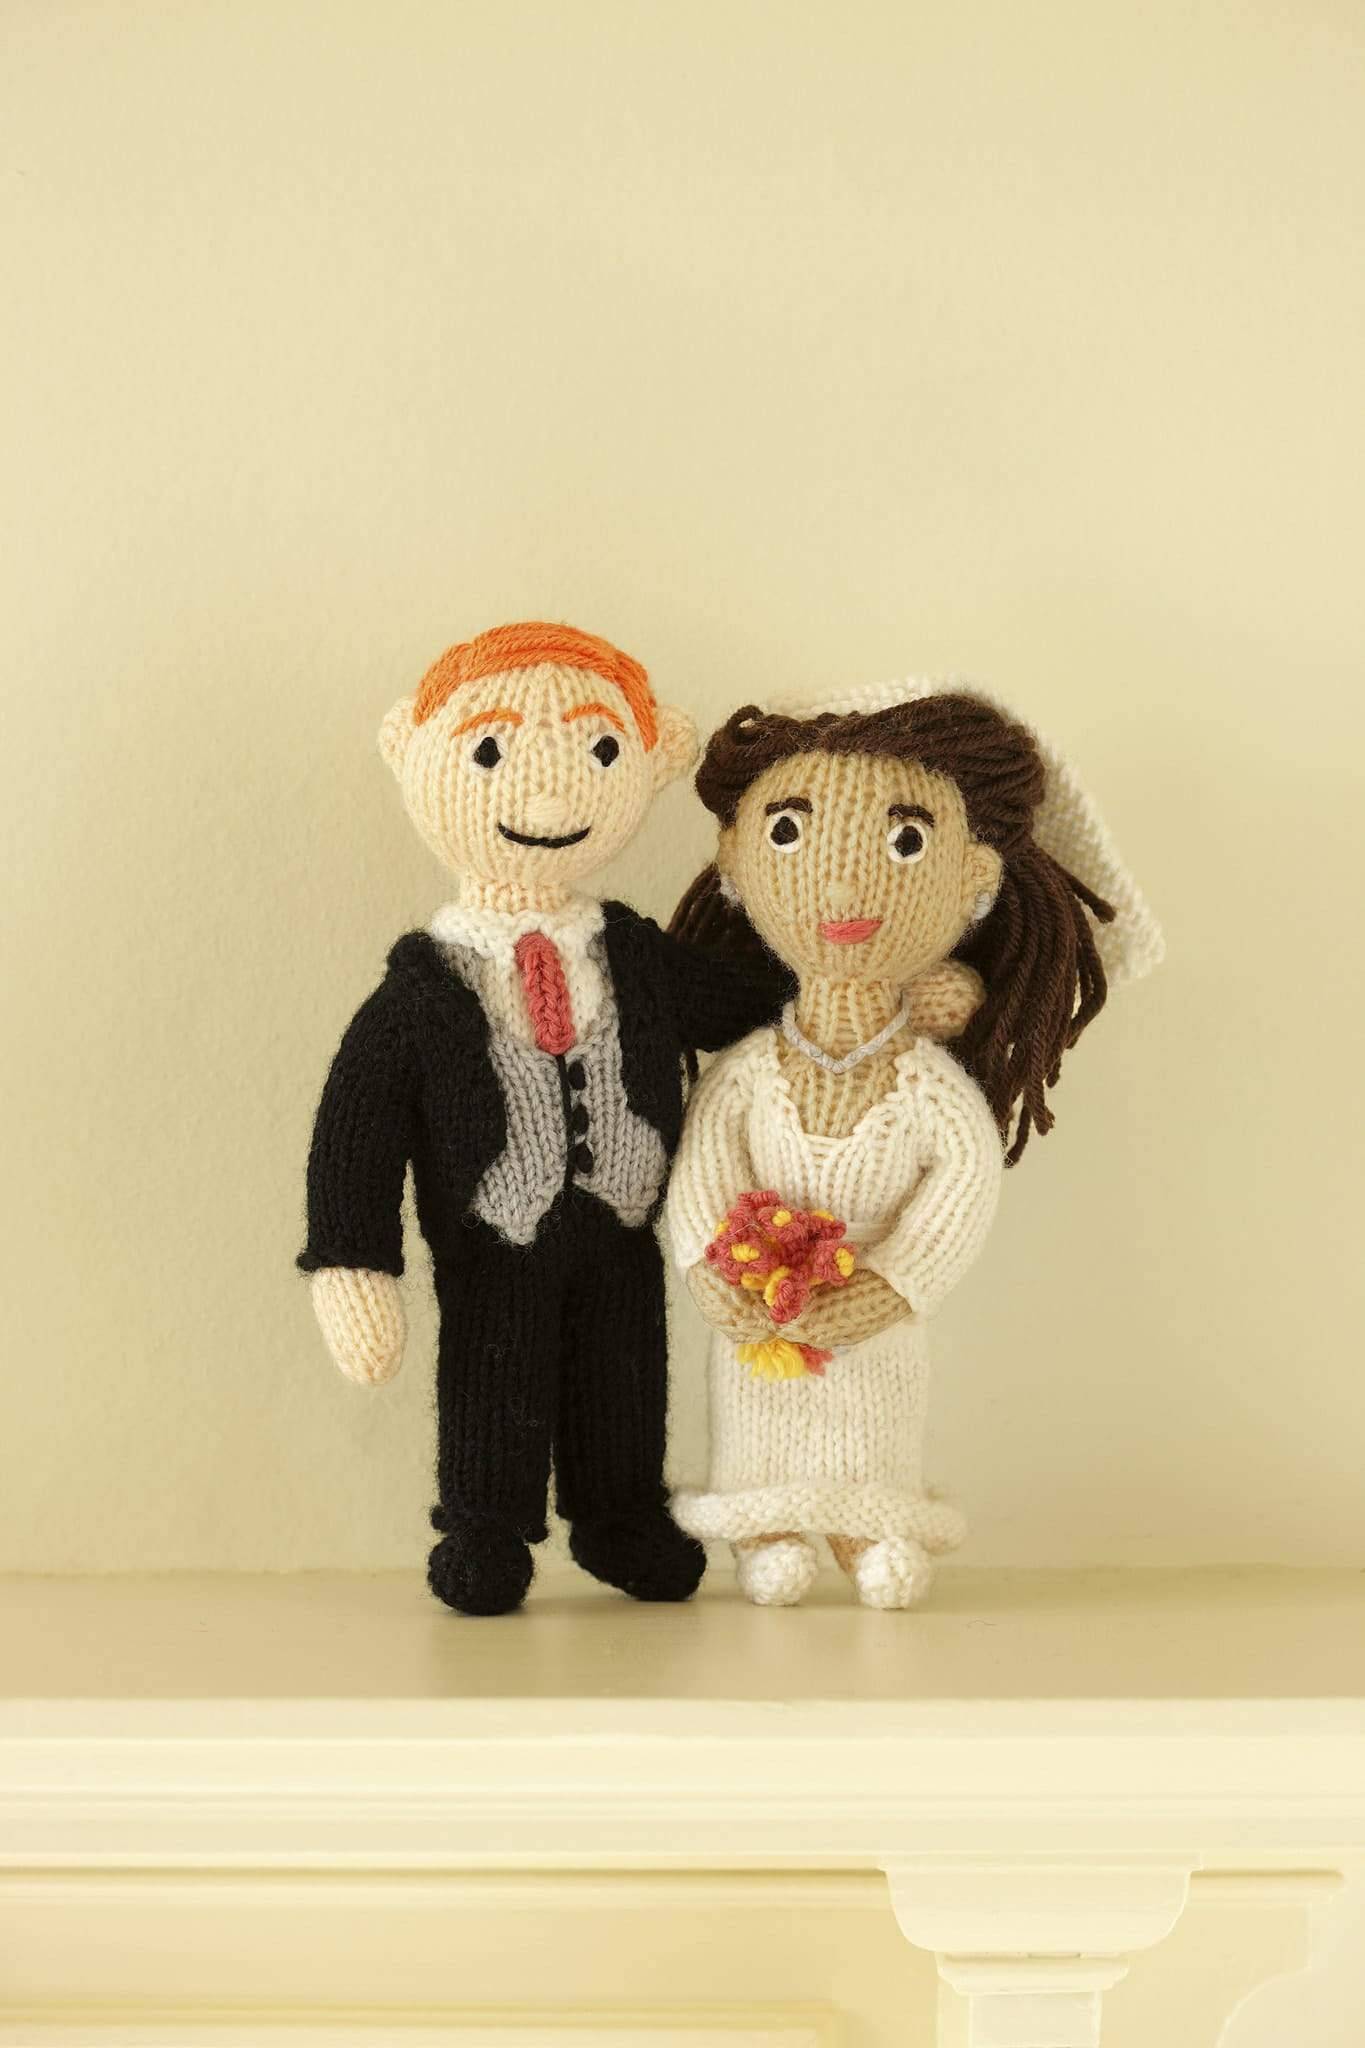 Harry and Meghan Bride and Groom Dolls Knitting Patterns The Knitting